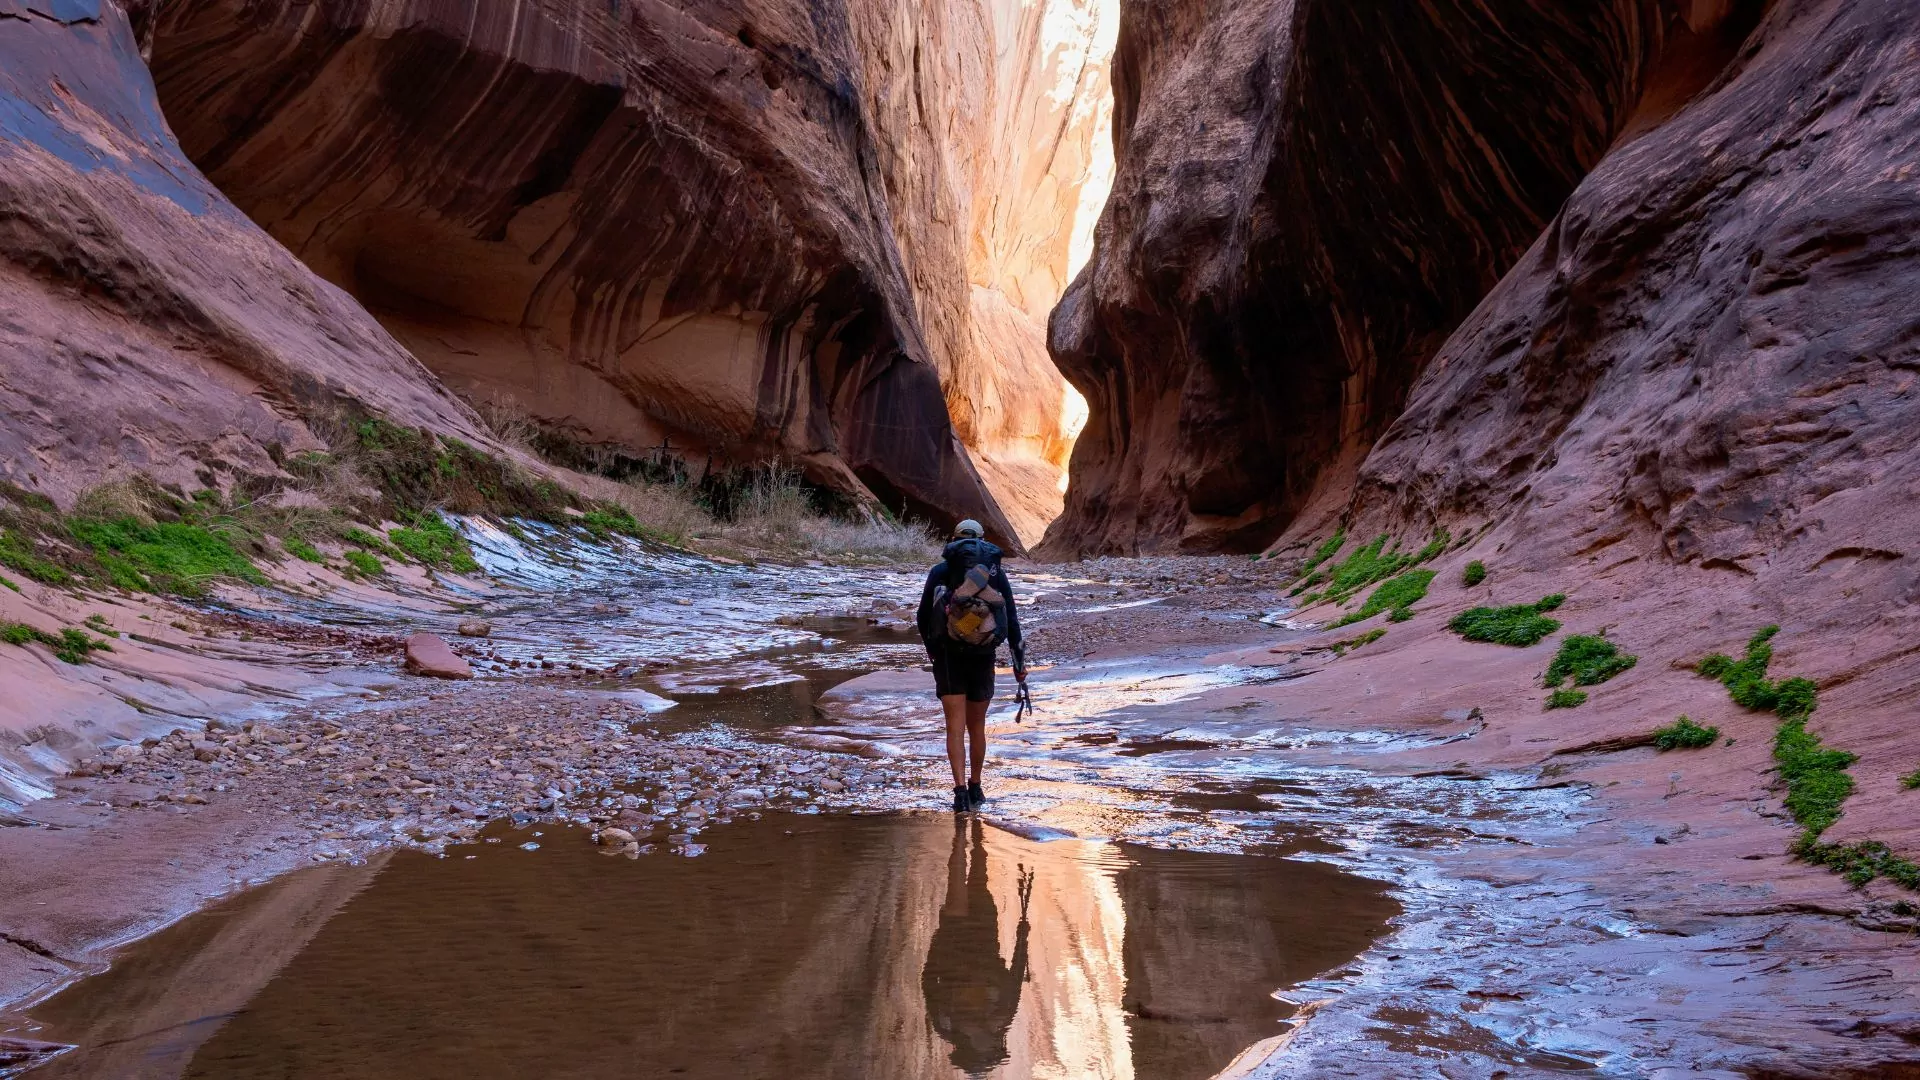 The author backpacks through shallow water in a Utah slot canyon, casting a reflection behind him